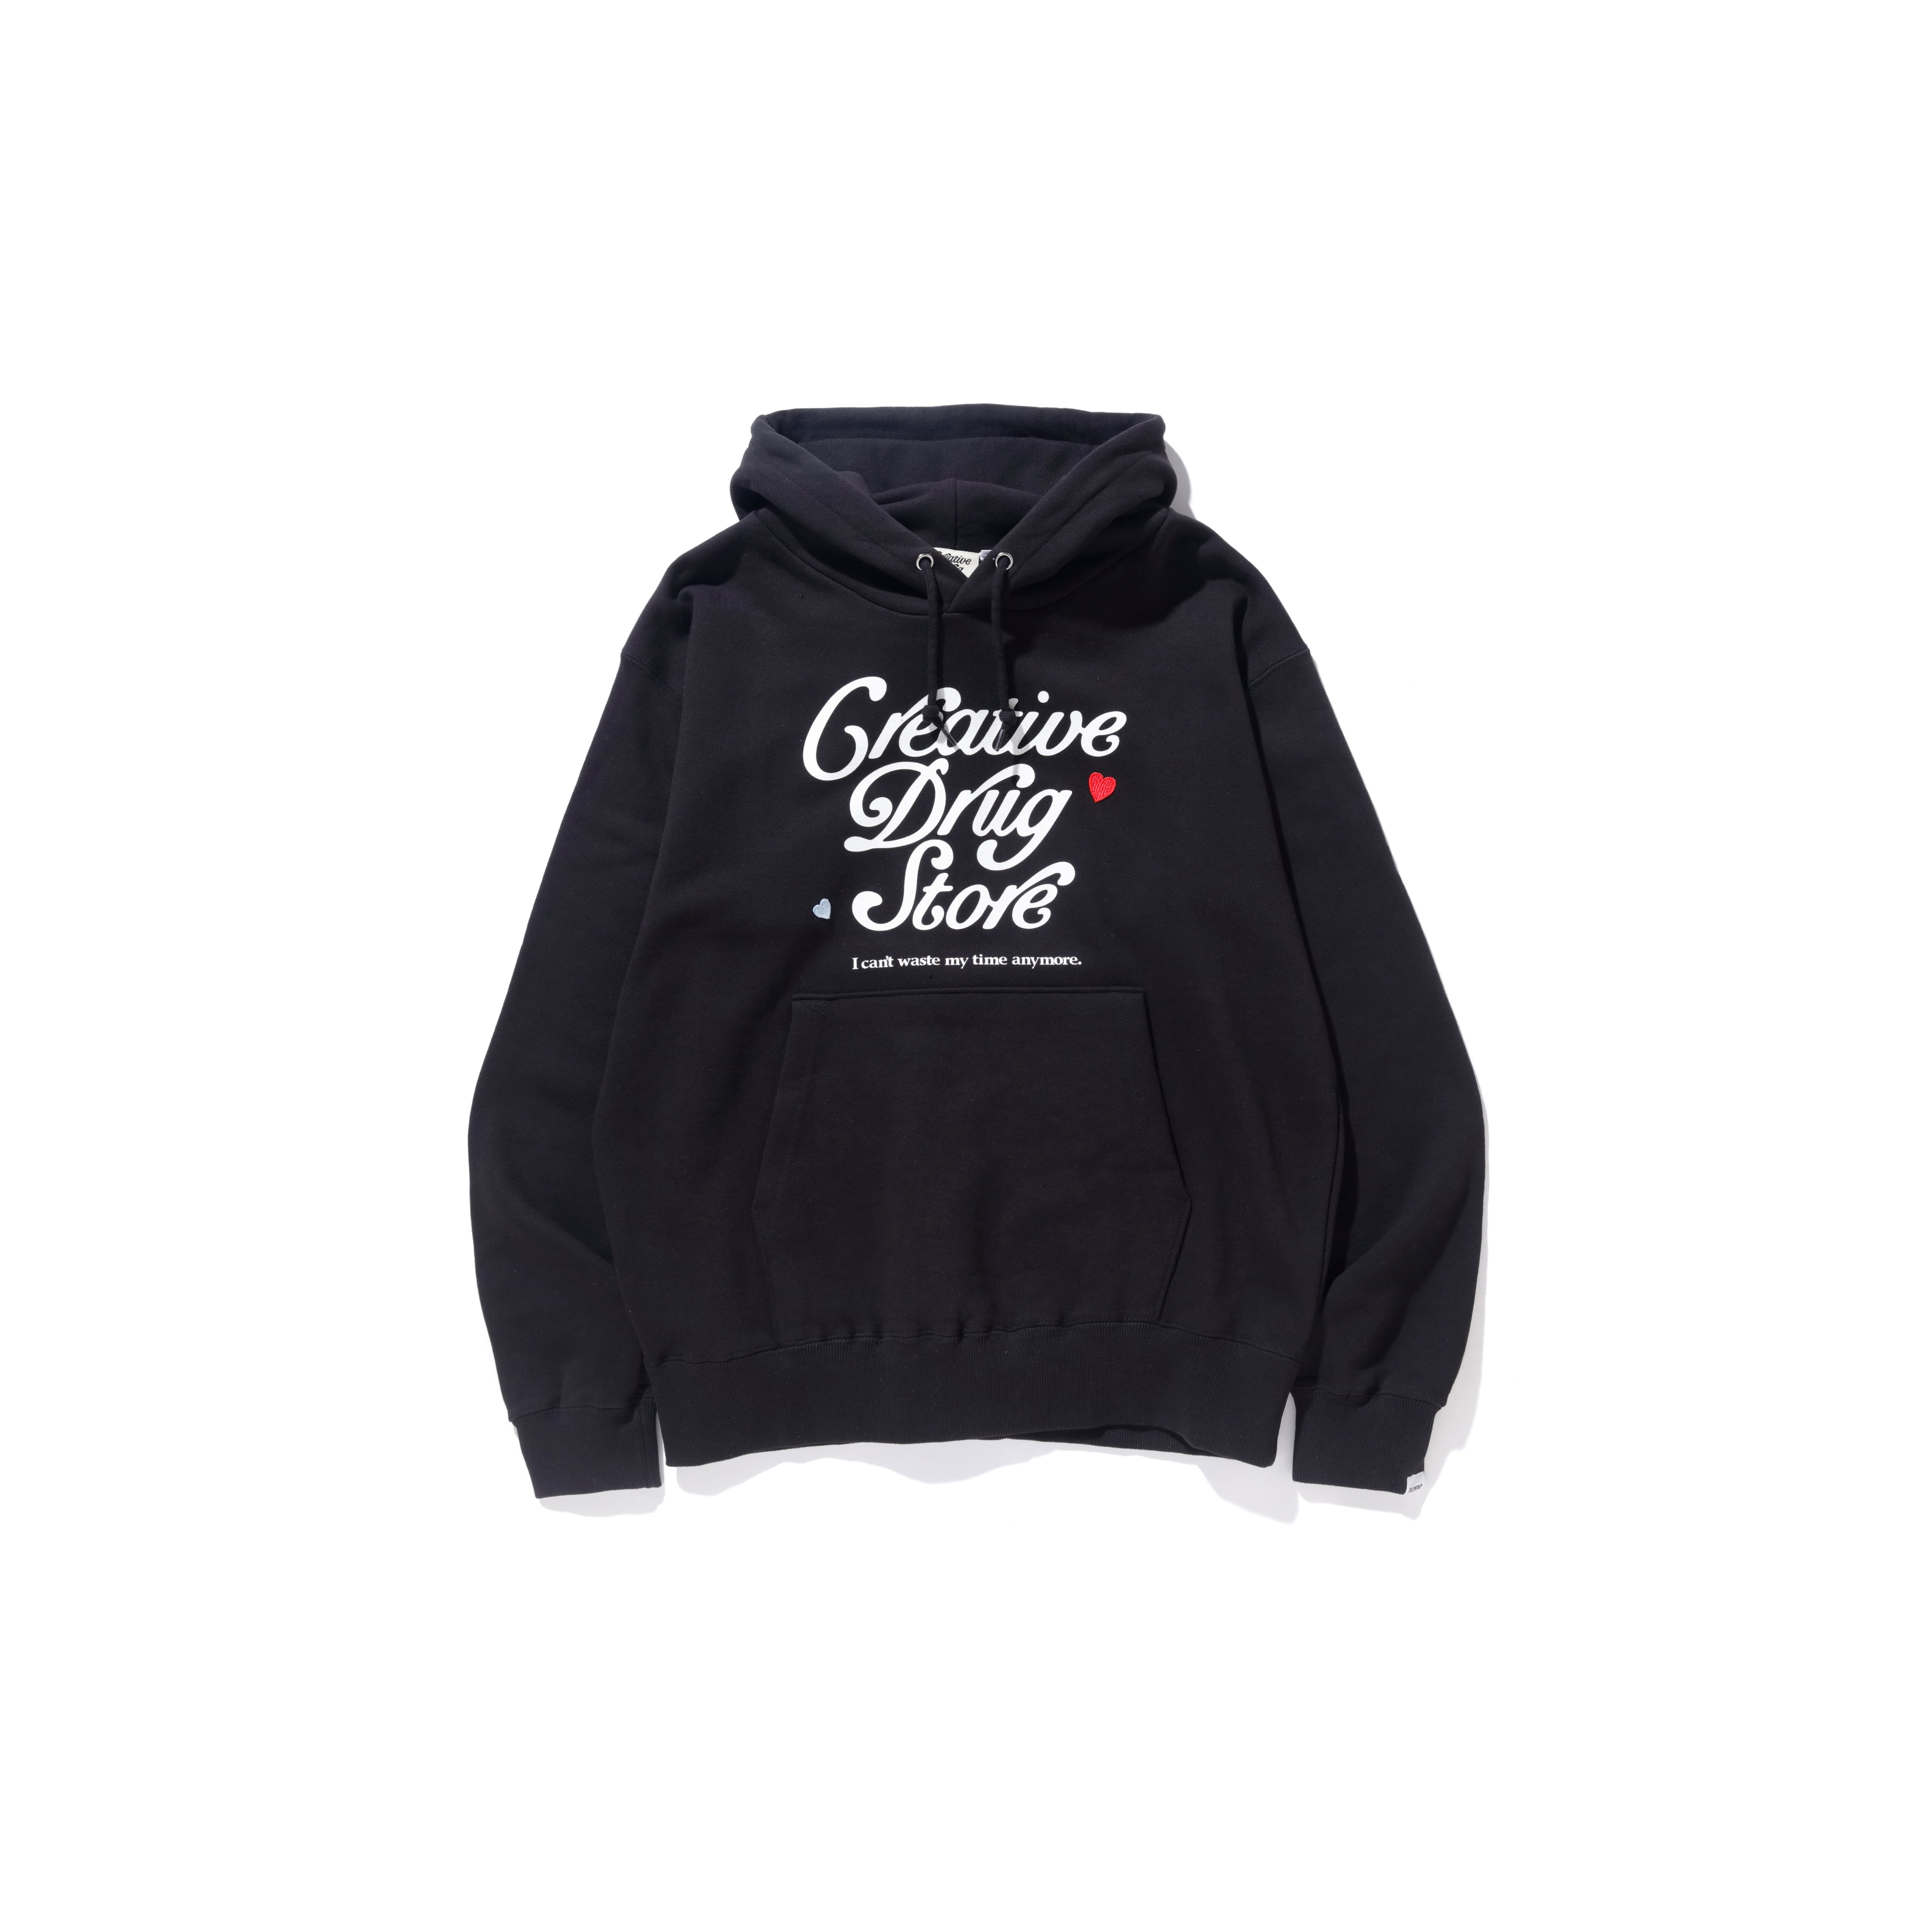 CREATIVE WASTED STORE Hoodie Lサイズ verdyアンダーカバー